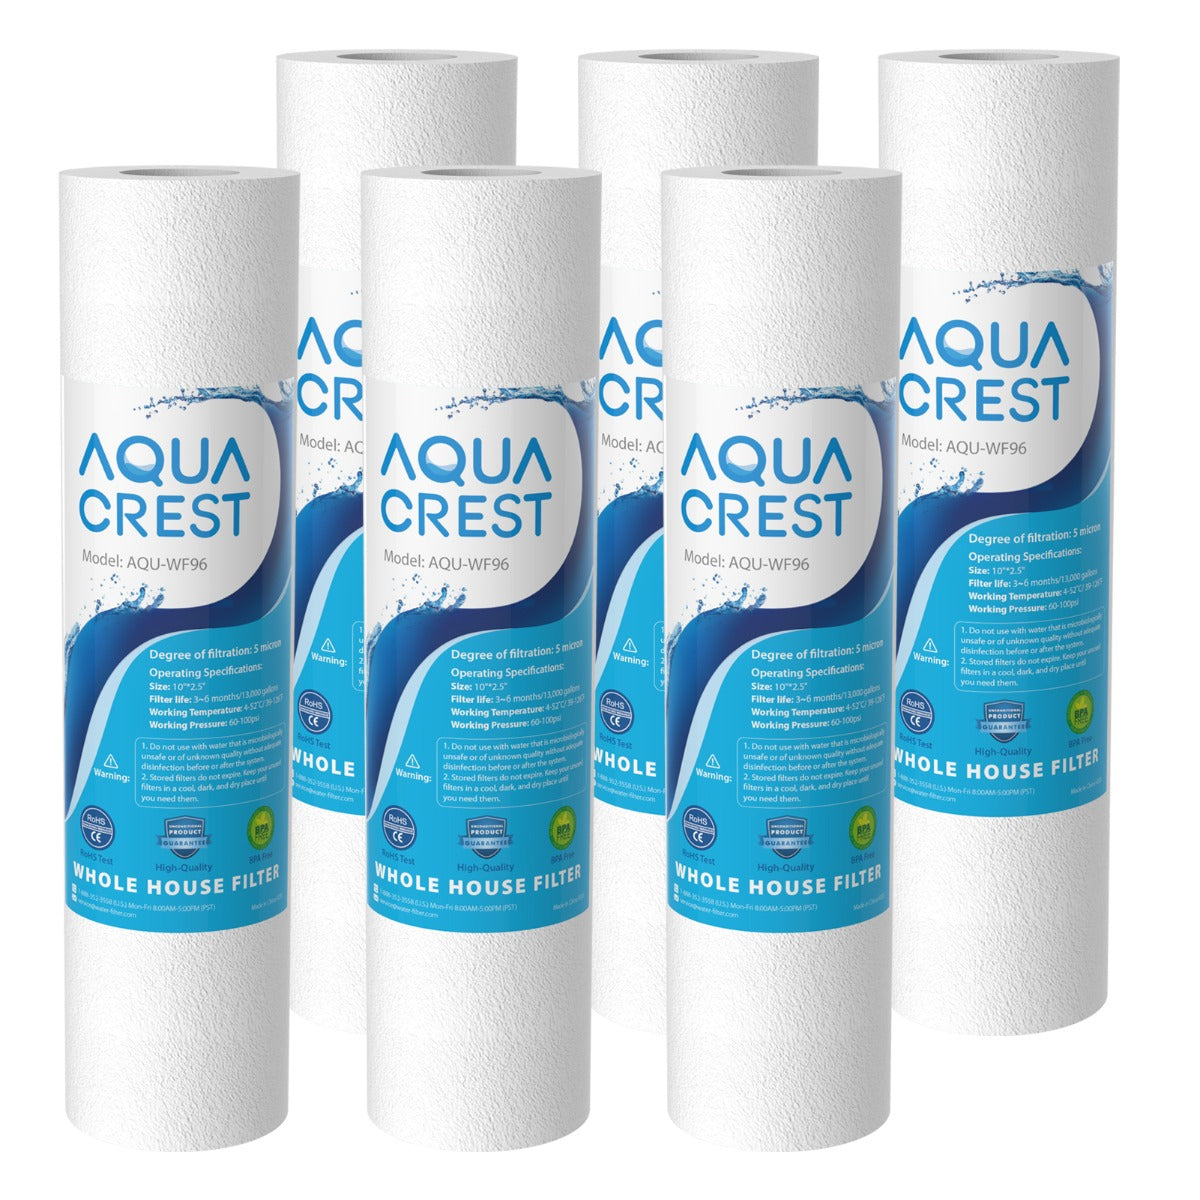 AQUACREST FXHTC 5 Micron 10 x 4.5 Whole House Water Filter, Replacement  for GE FXHTC, GXWH40L, American Plumber W10-PR, W10-BC, Culligan RFC-BBSA